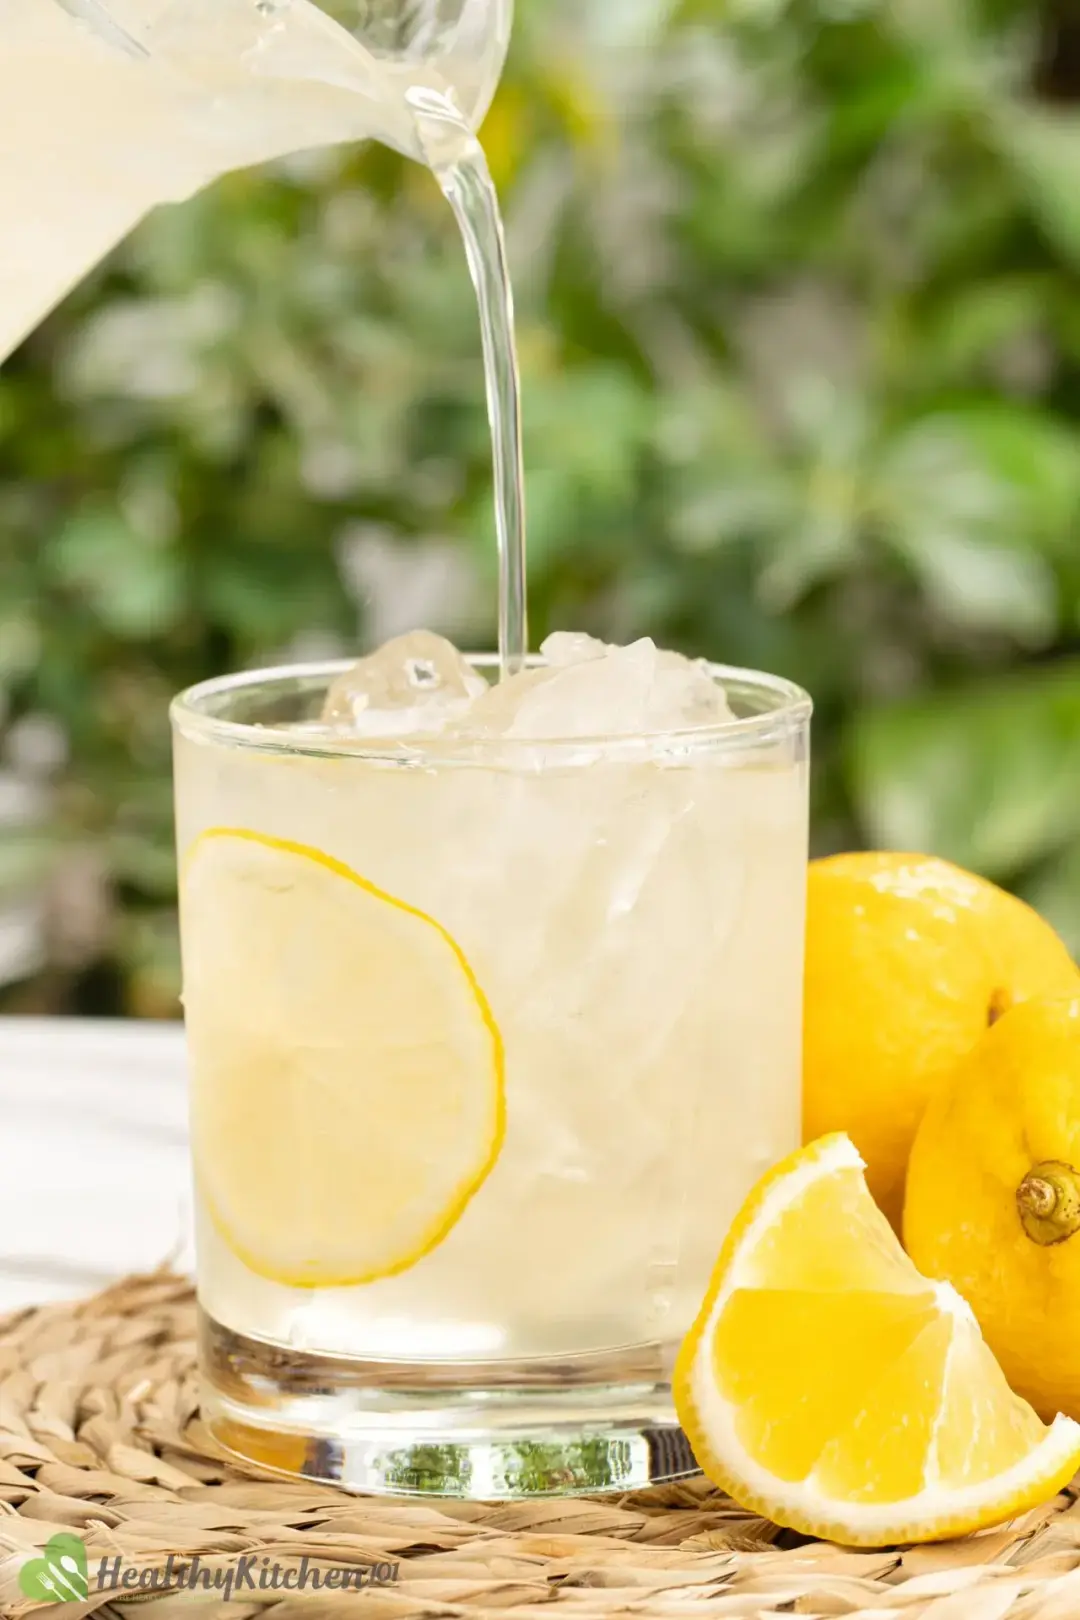 A glass of lemonade poured from a pitcher, put near some lemon wedges